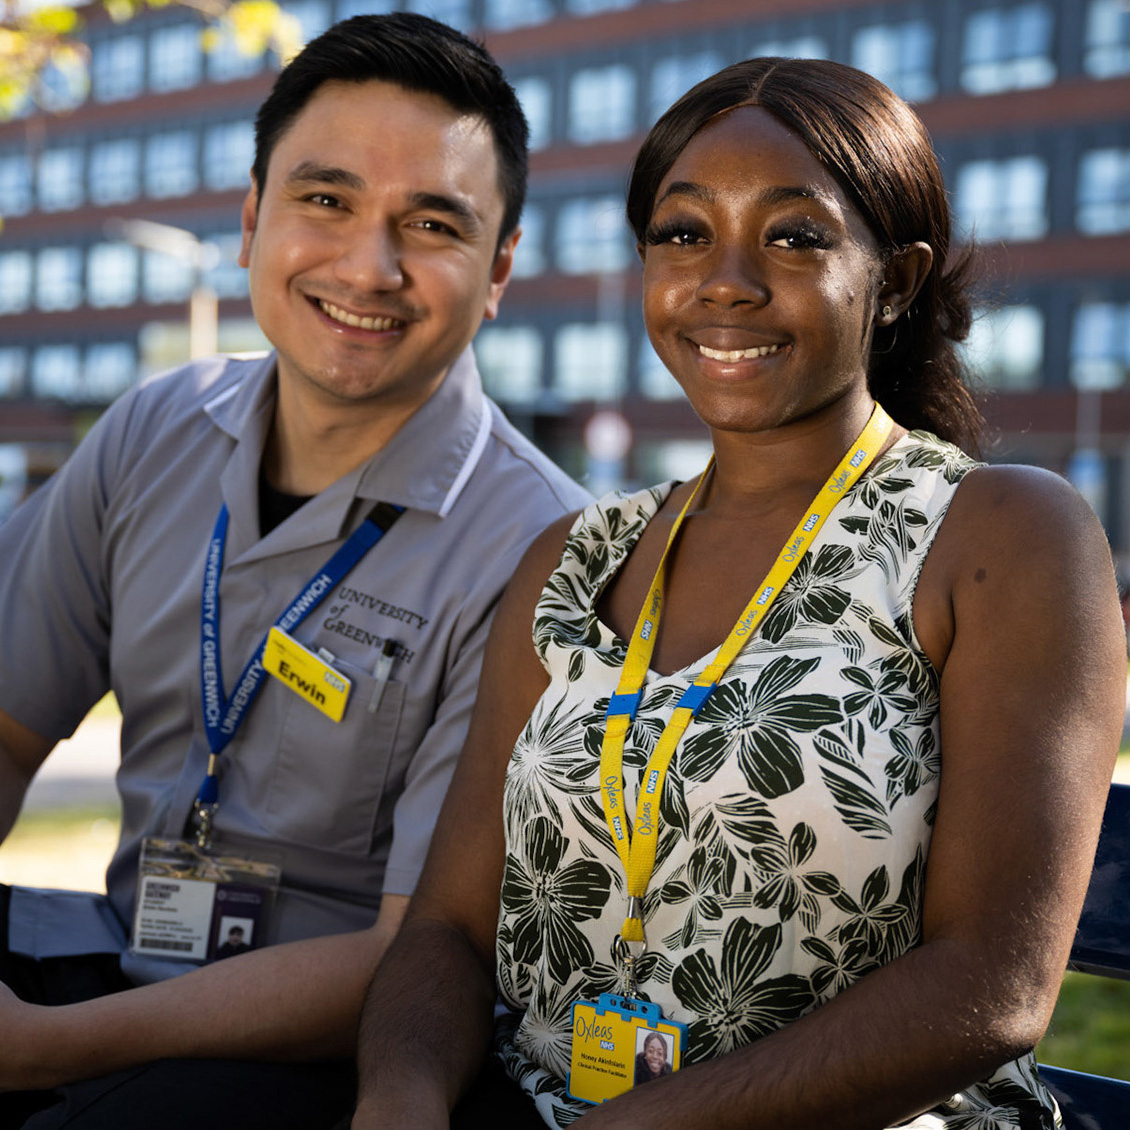 📢We’re looking for people who are about to graduate or have recently graduated to start their career with us at Oxleas in the autumn. The 2023 cohort of Graduate Healthcare Workers will work within our teams across Bexley, Bromley and Greenwich. ⬇ More: oxleas.nhs.uk/news/exciting-…